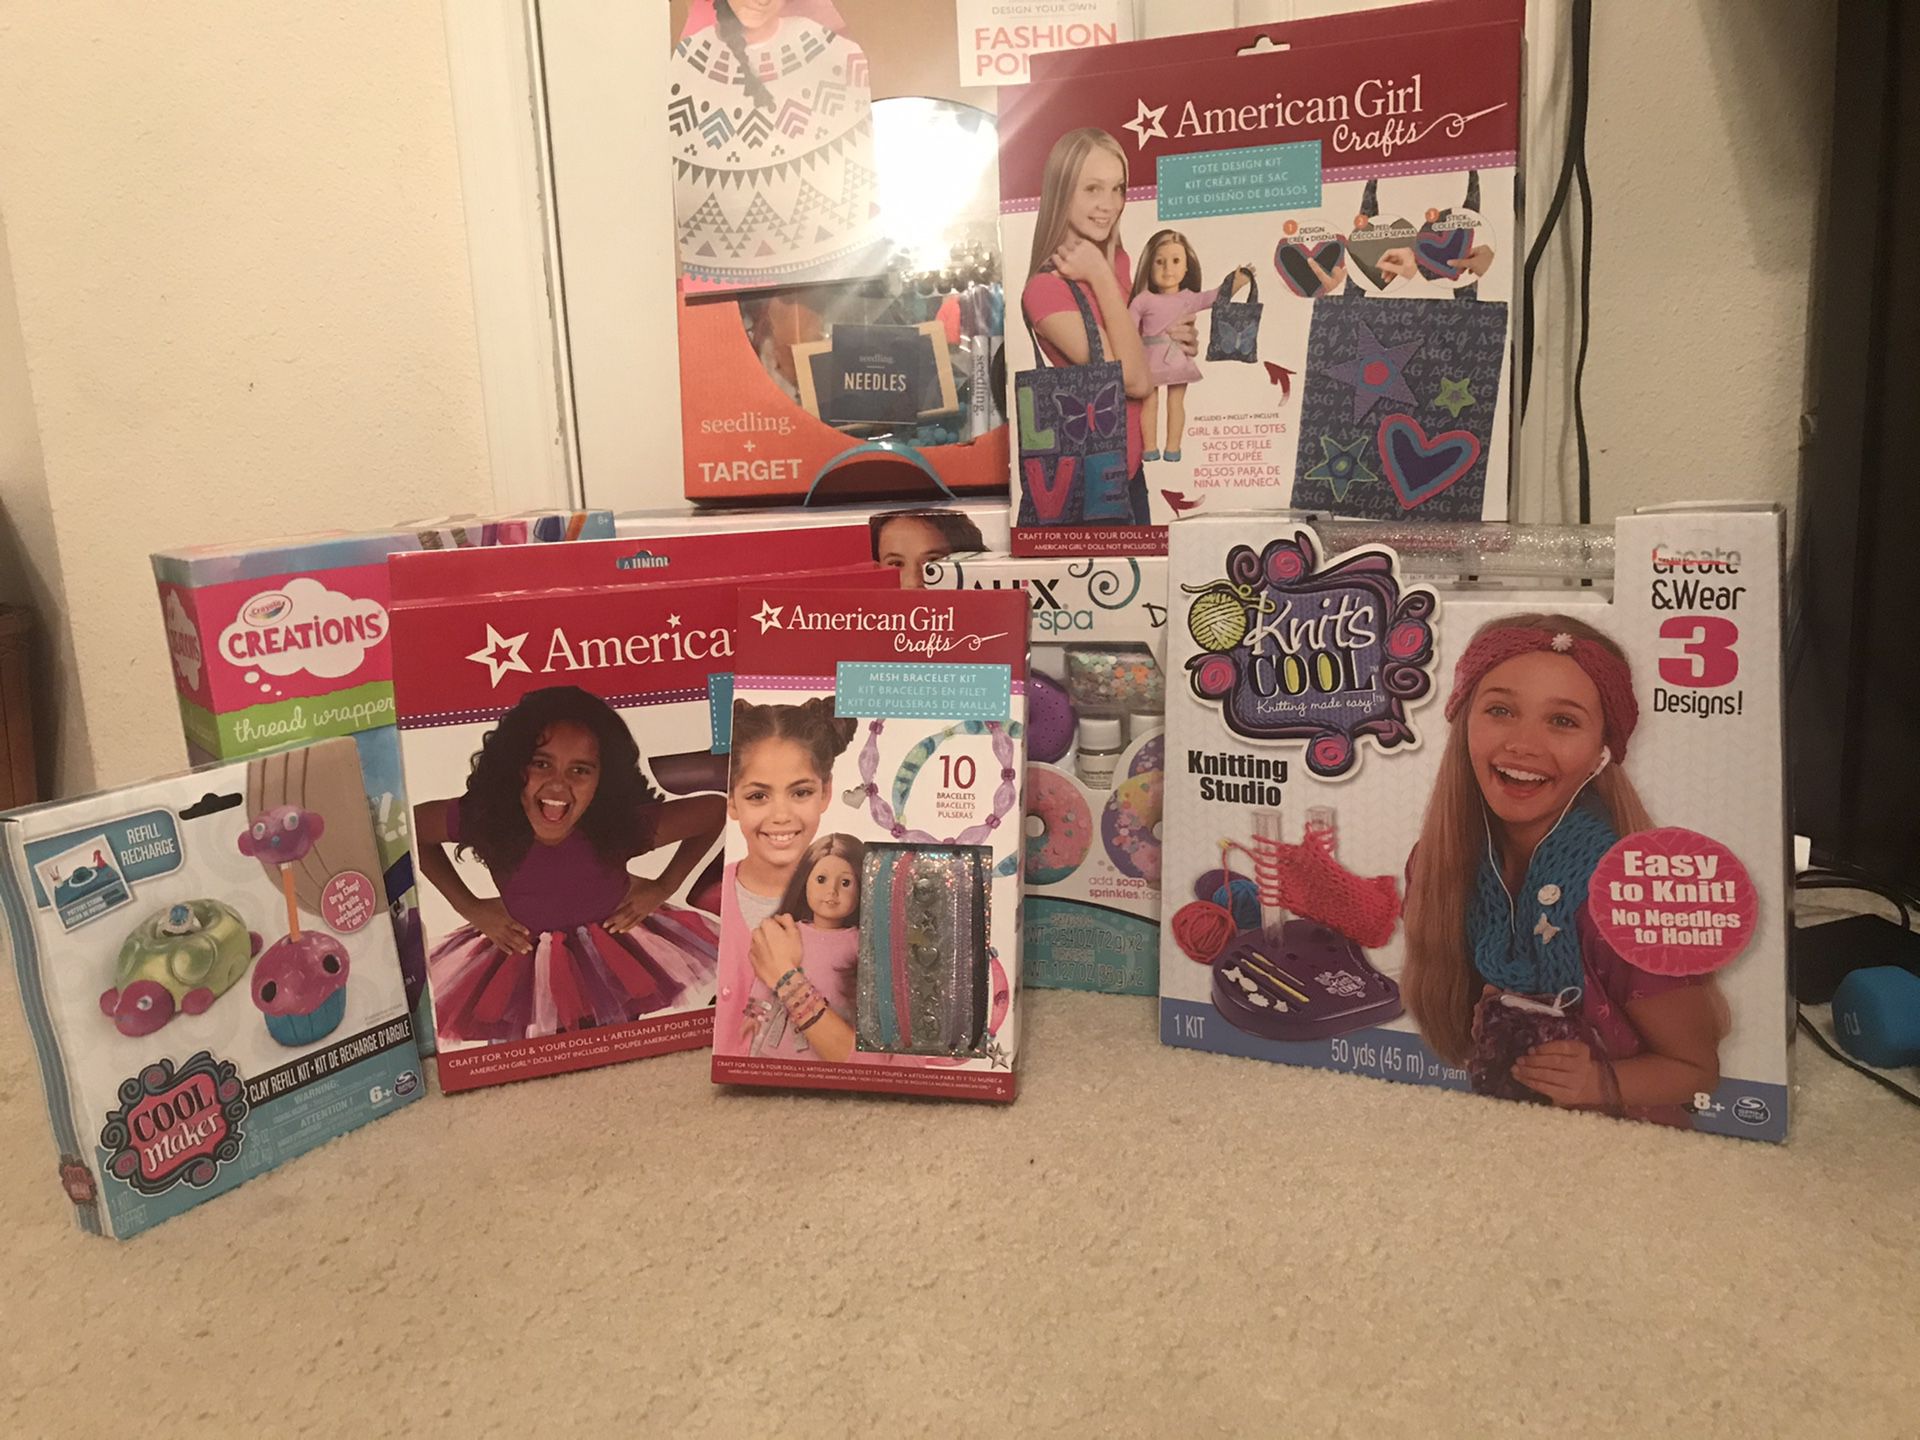 HUGE lot of Girl Crafts to pass time!